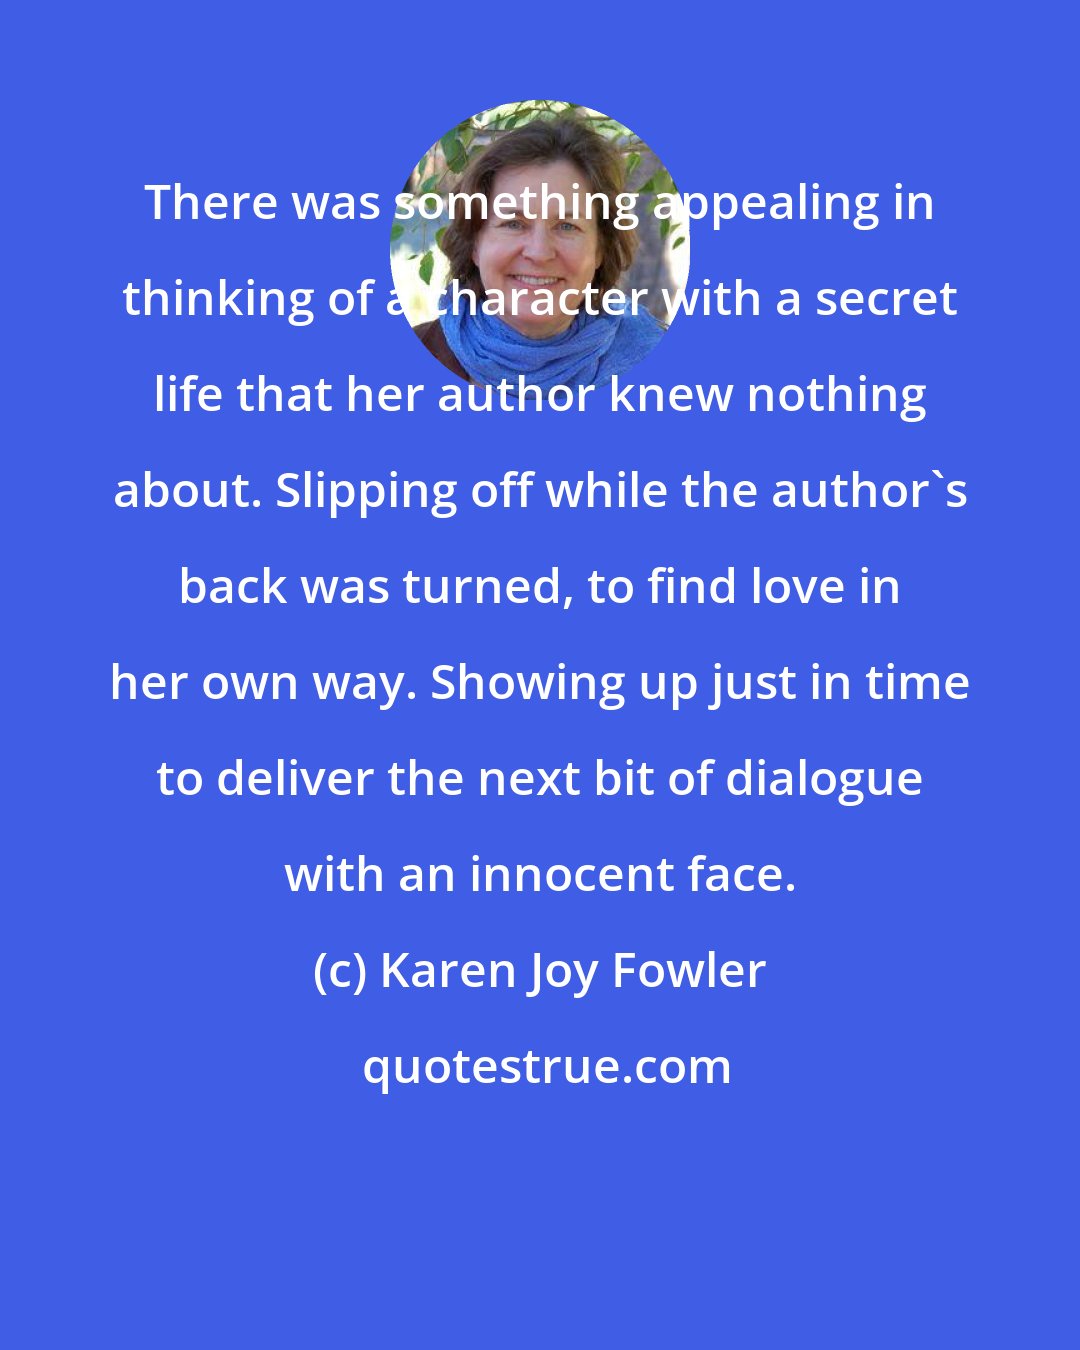 Karen Joy Fowler: There was something appealing in thinking of a character with a secret life that her author knew nothing about. Slipping off while the author's back was turned, to find love in her own way. Showing up just in time to deliver the next bit of dialogue with an innocent face.